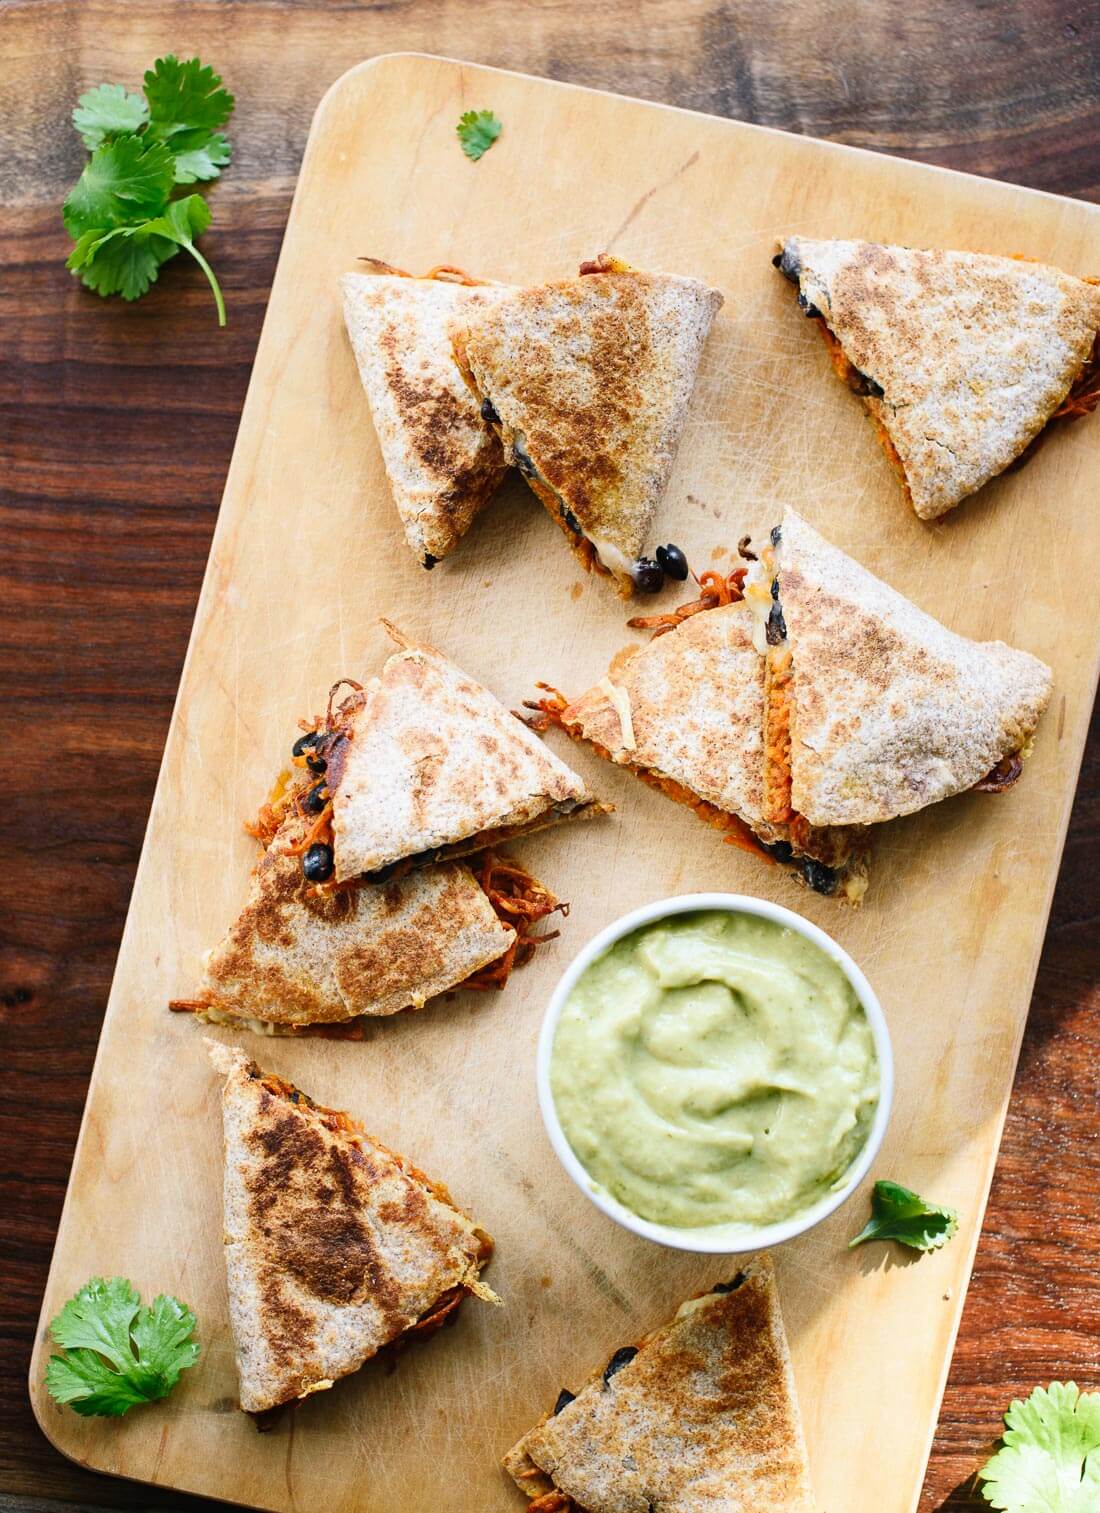 Sweet potato black bean quesadillas with creamy avocado salsa verde (you can make these without a spiralizer, too!) - cookieandkate.com